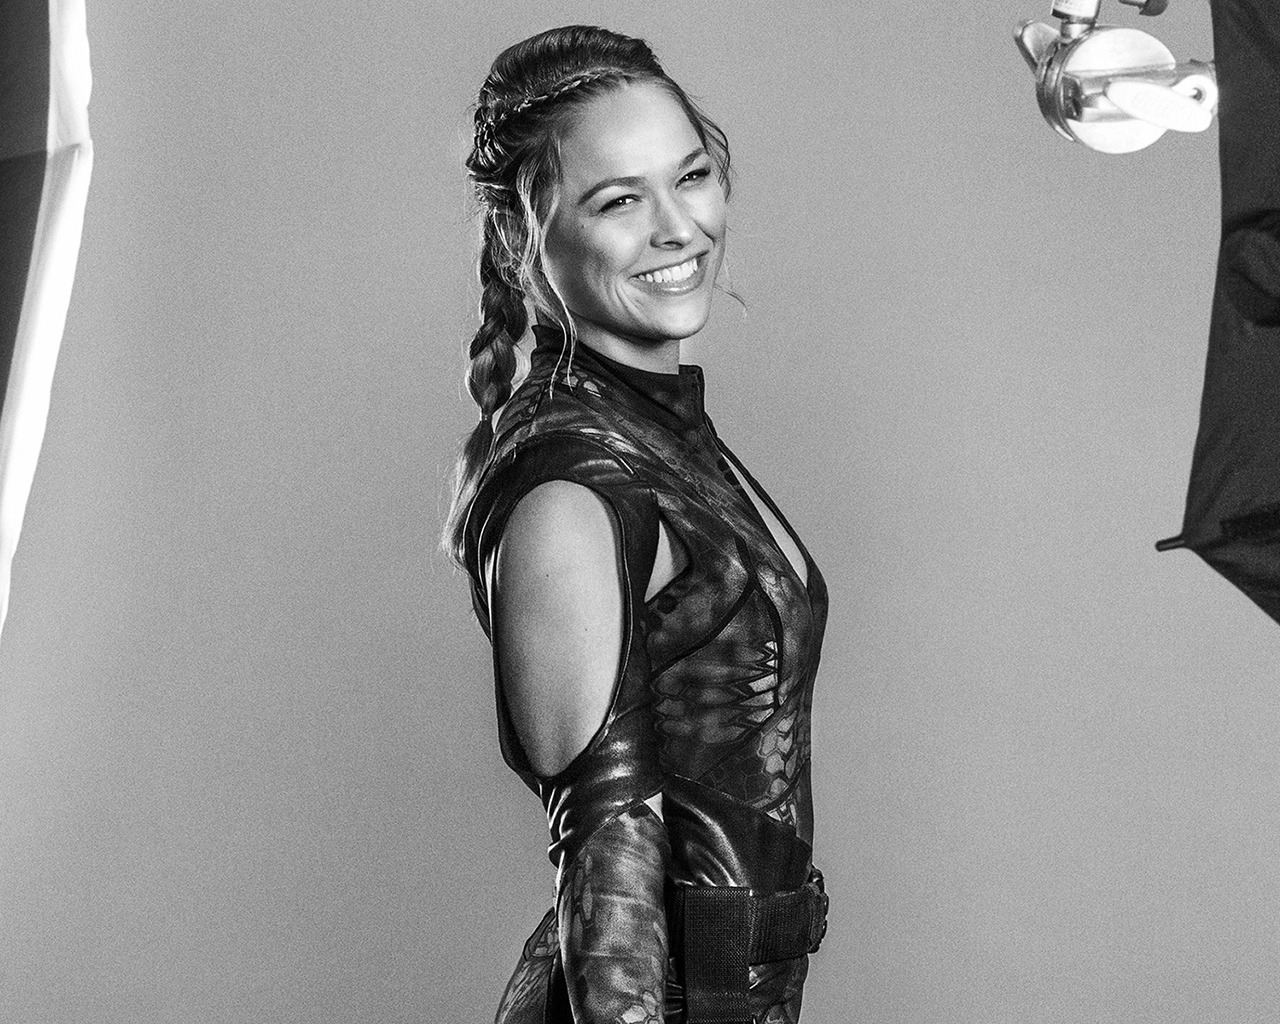 Ronda Rousey The Expendables 3 for 1280 x 1024 resolution